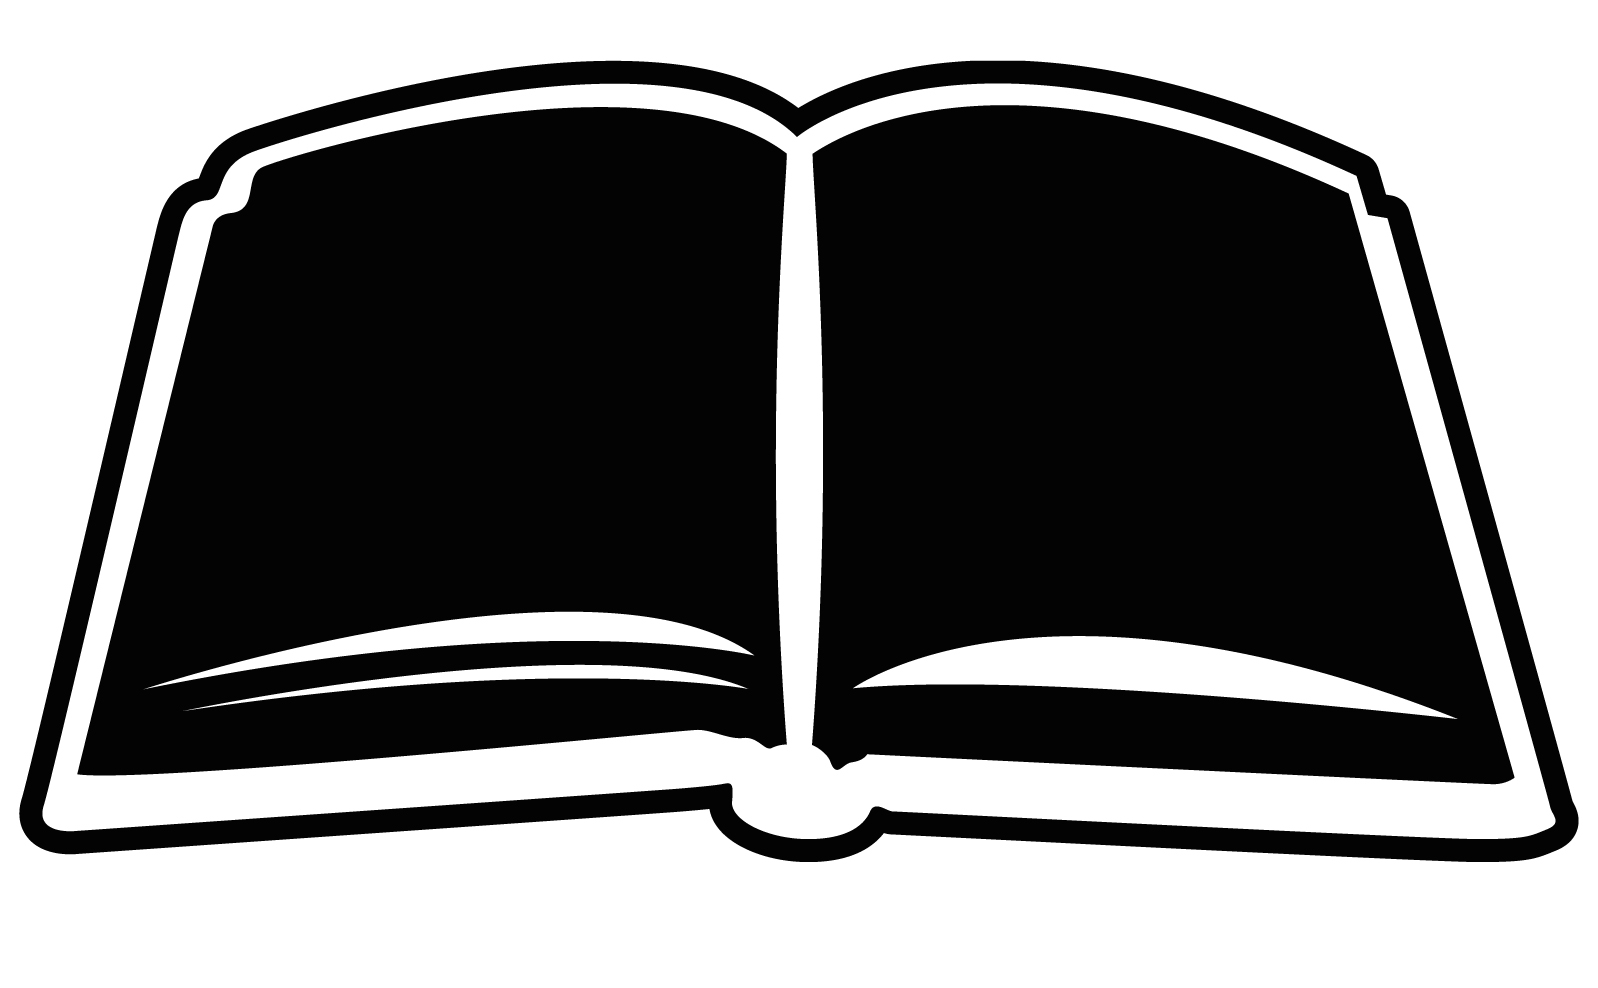 Open Book Clipart - Open Book Black And White, Transparent background PNG HD thumbnail